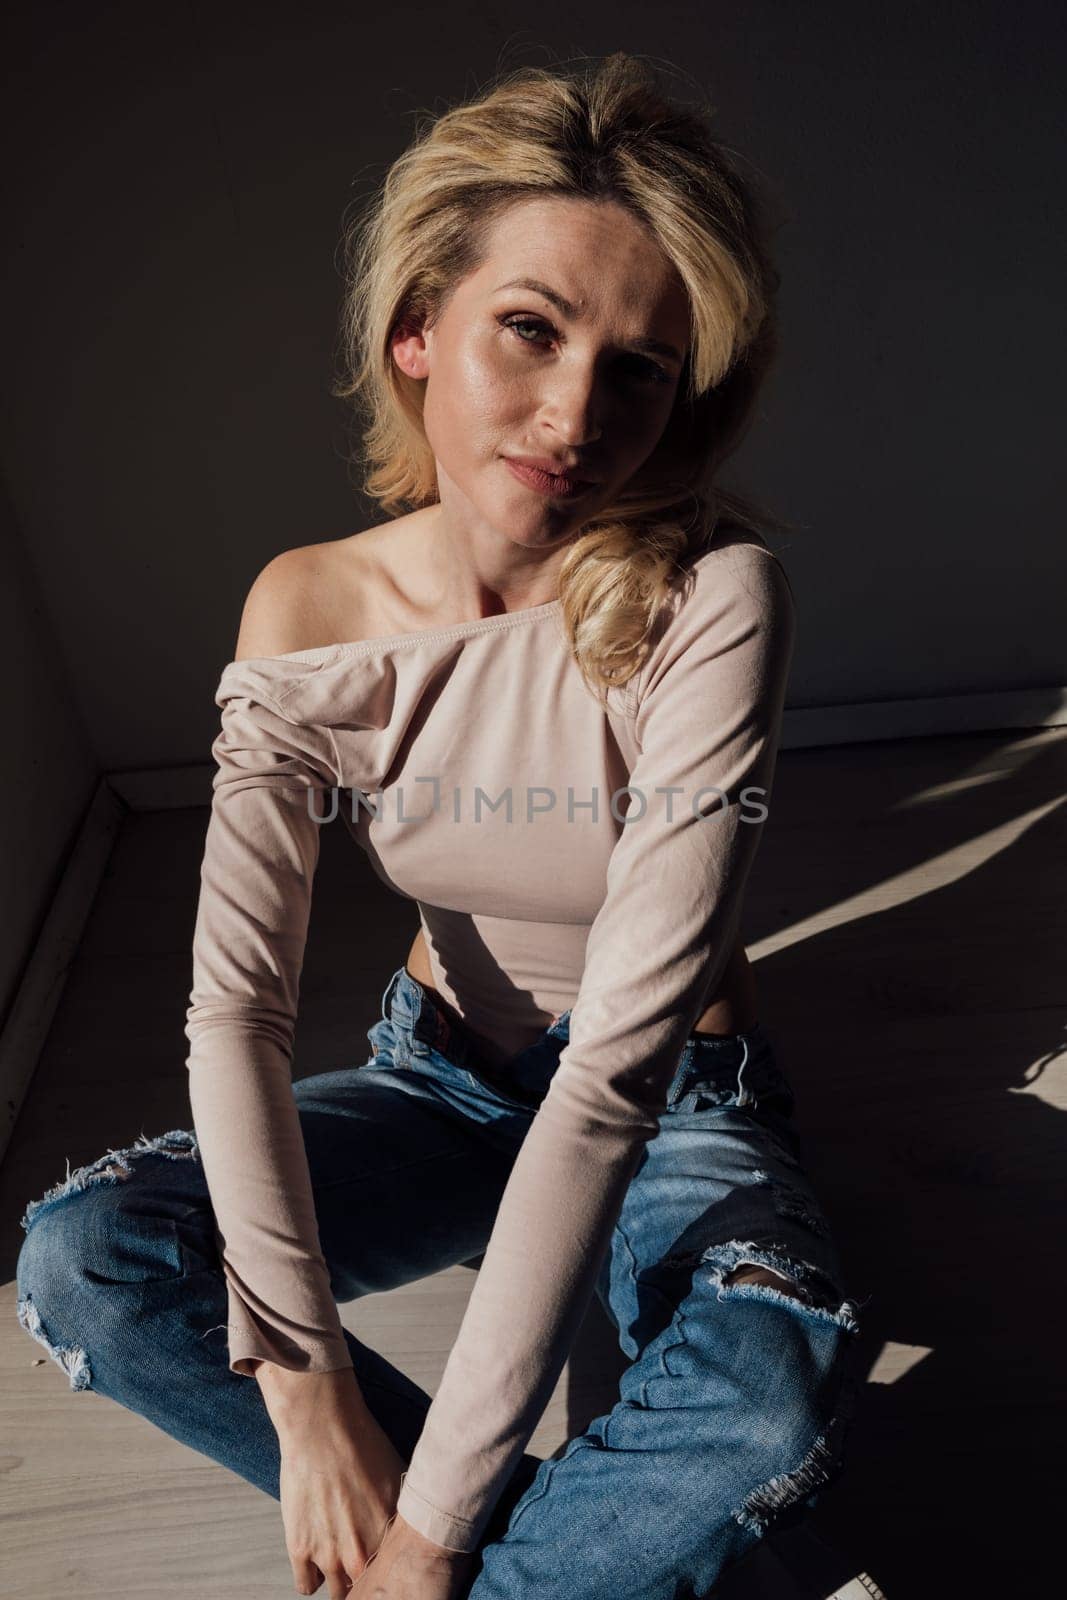 Beautiful blonde woman in jeans at home